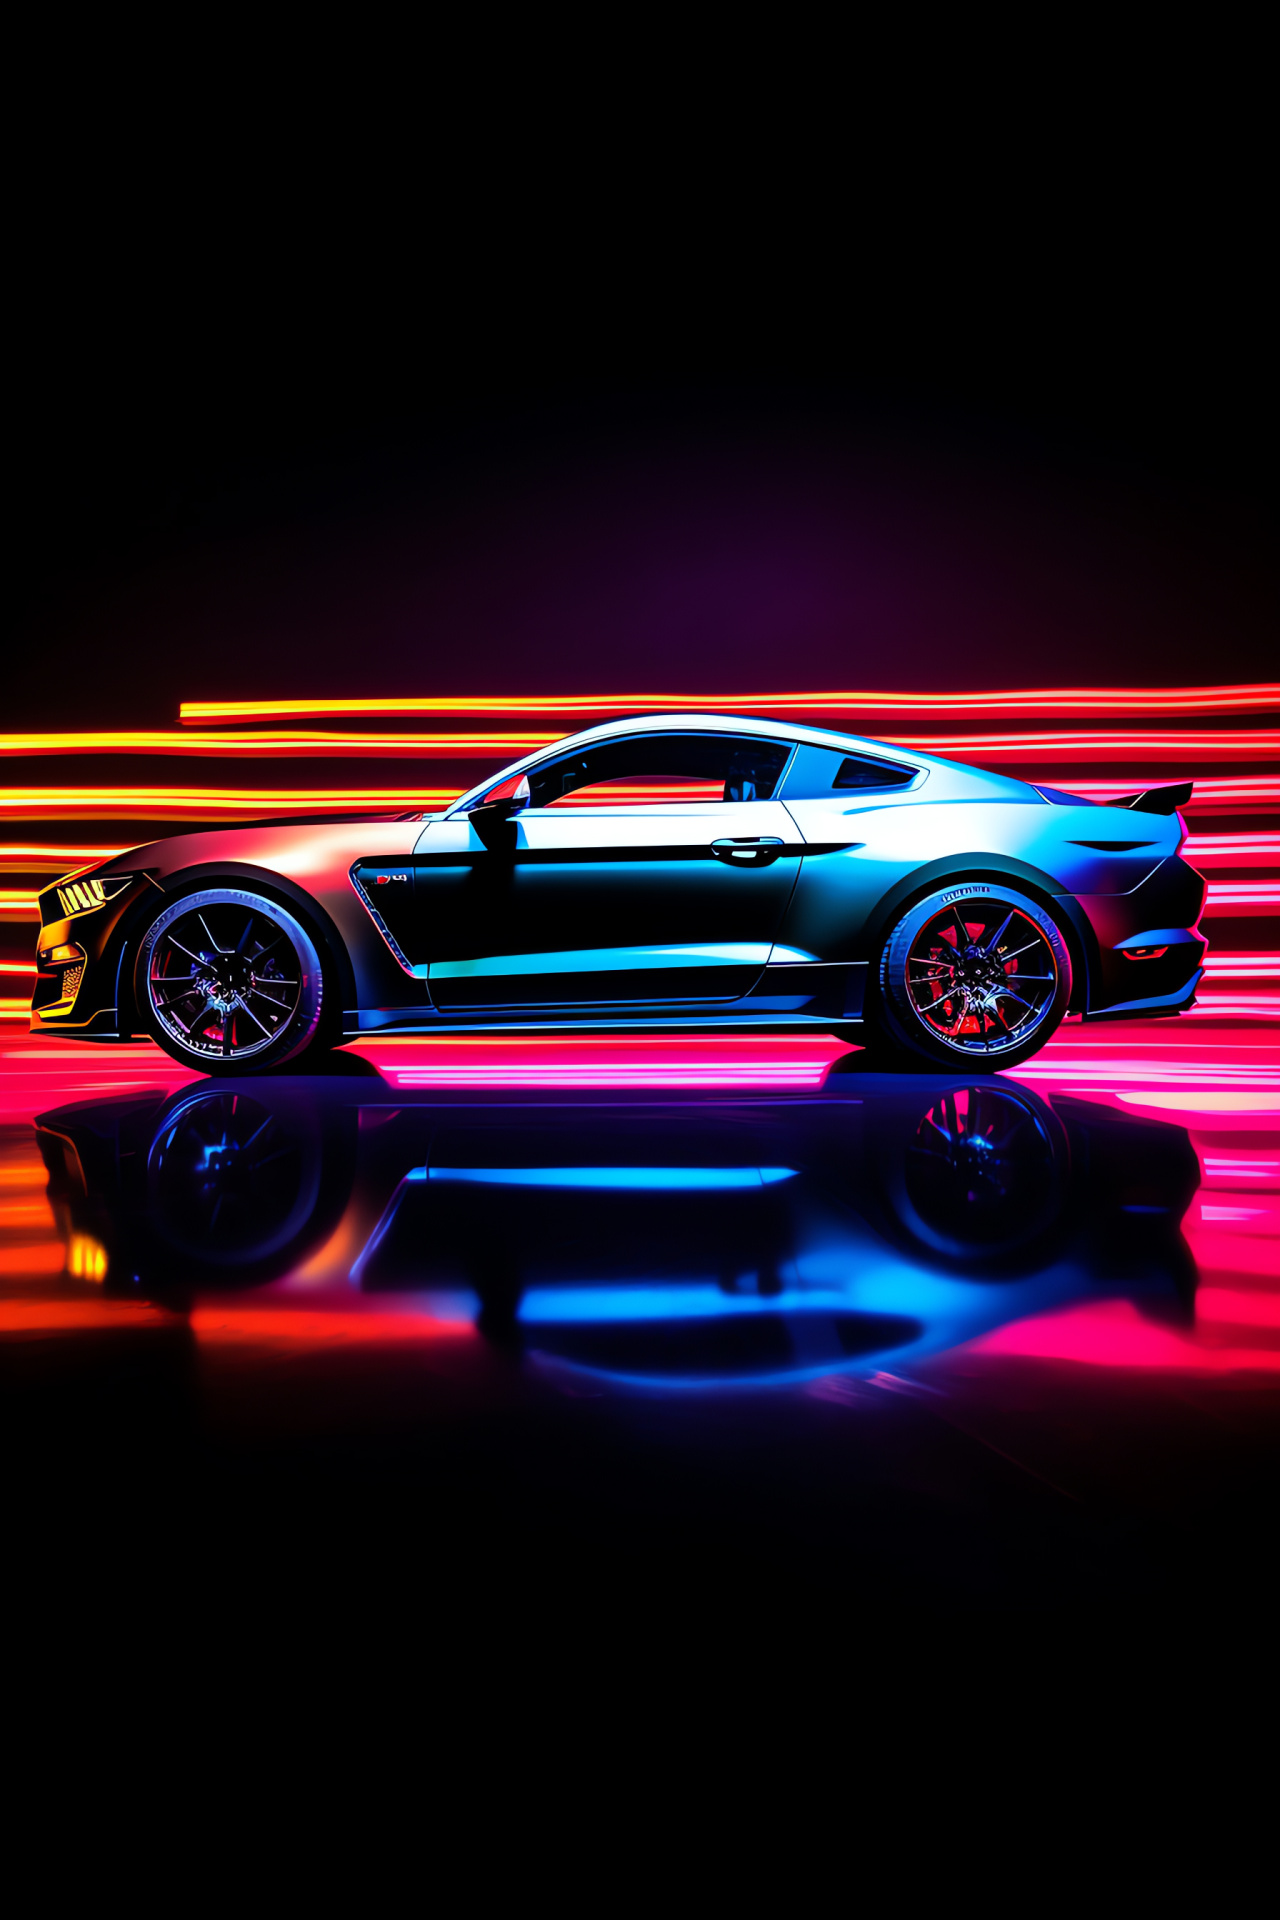 Neon speed Mustang, Fast-paced car profile, Luminous side impression, Speed symbol Mustang, Electric hue velocity, HD Phone Image